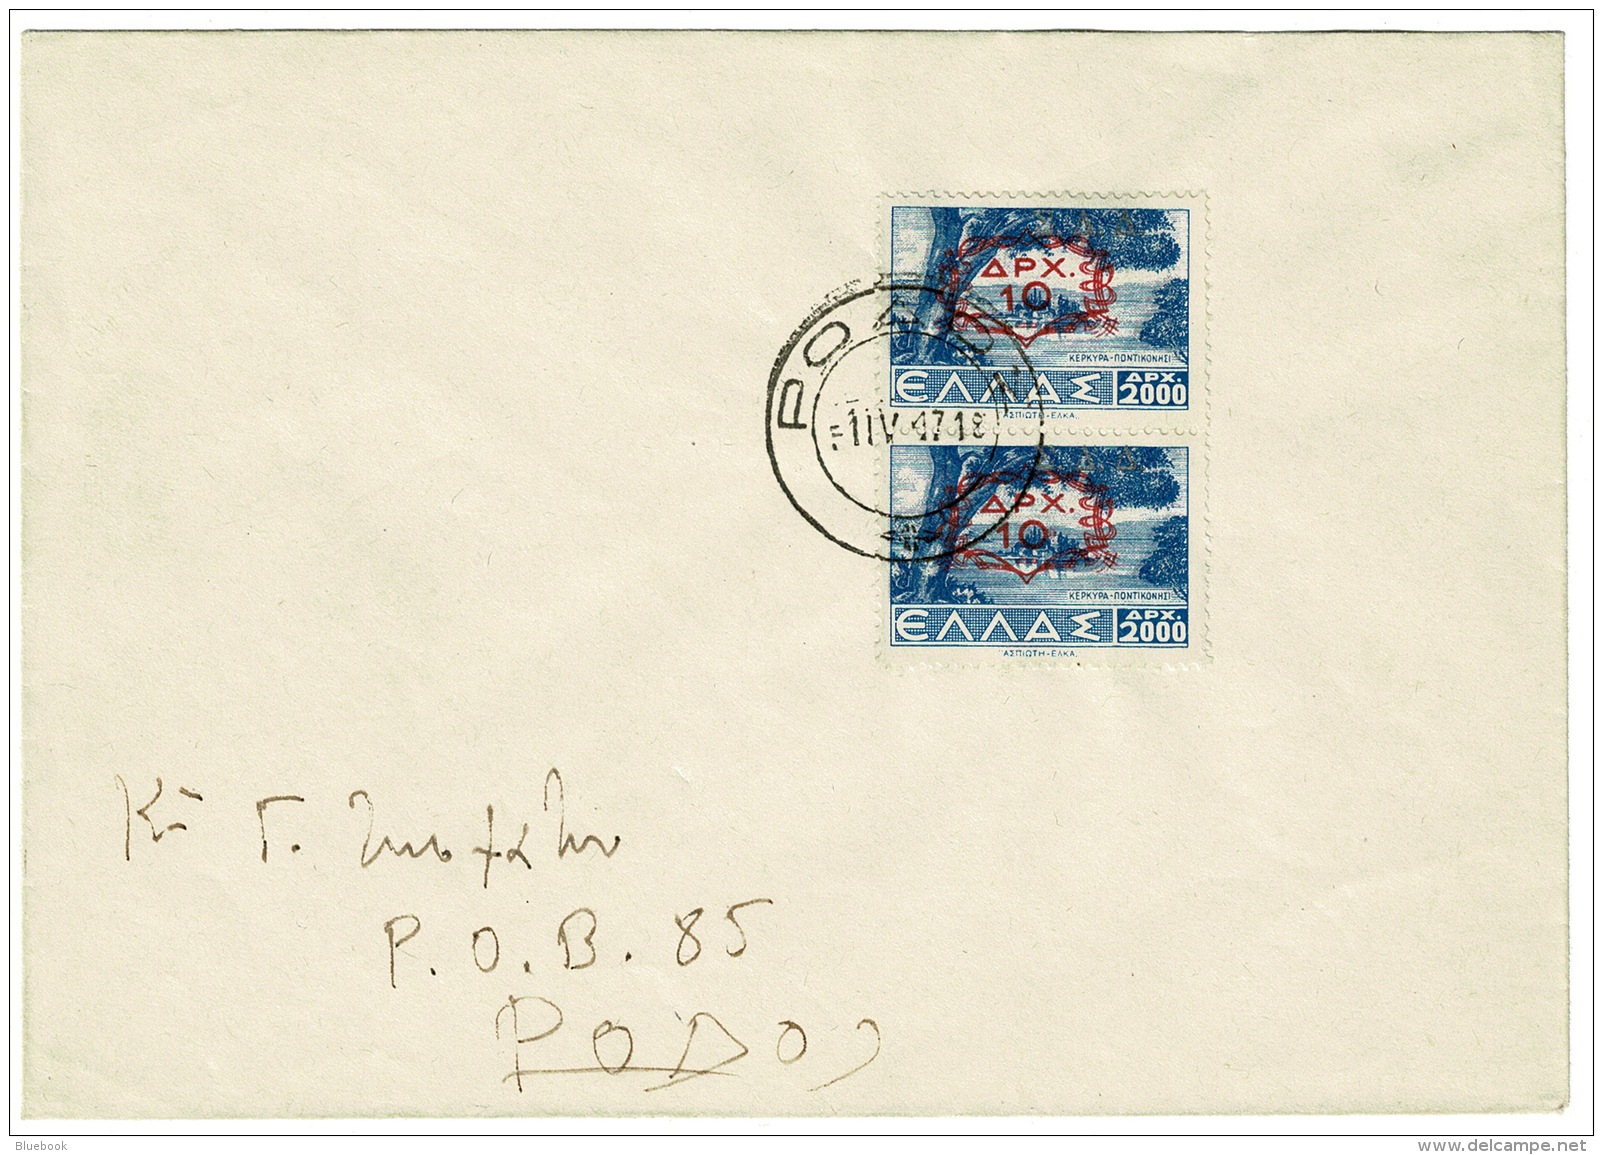 RB 1204 - Super 1947 Rhodes Cover With 2 X Silver Overprints - Greece Aegean Dodecanese - Dodekanesos